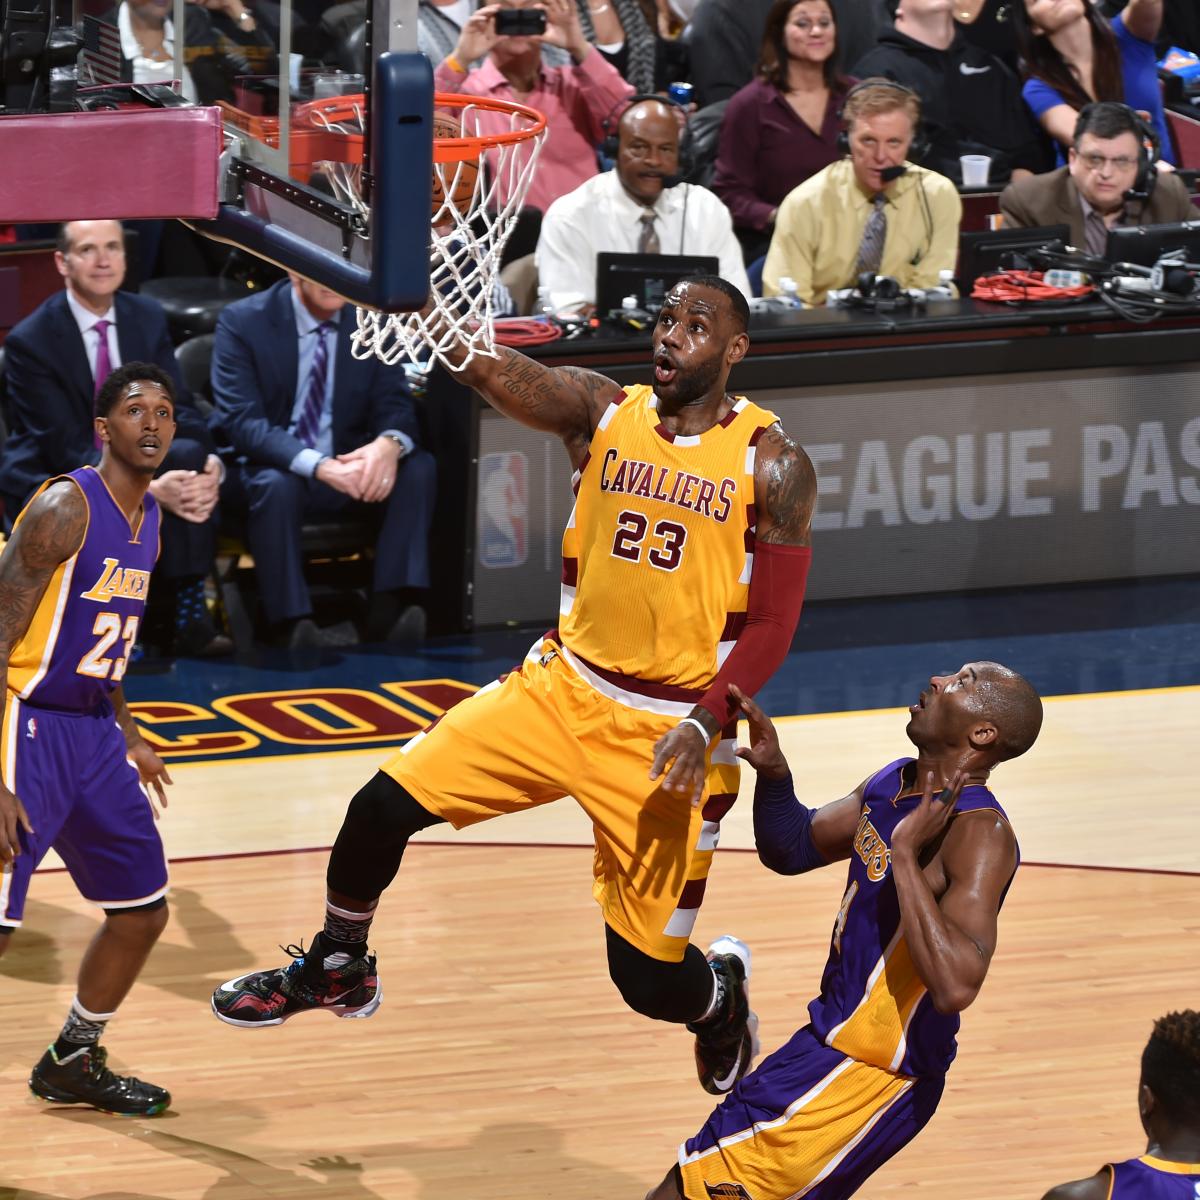 Lakers vs. Cavaliers: Score, Highlights and Reaction from 2016 Regular ...